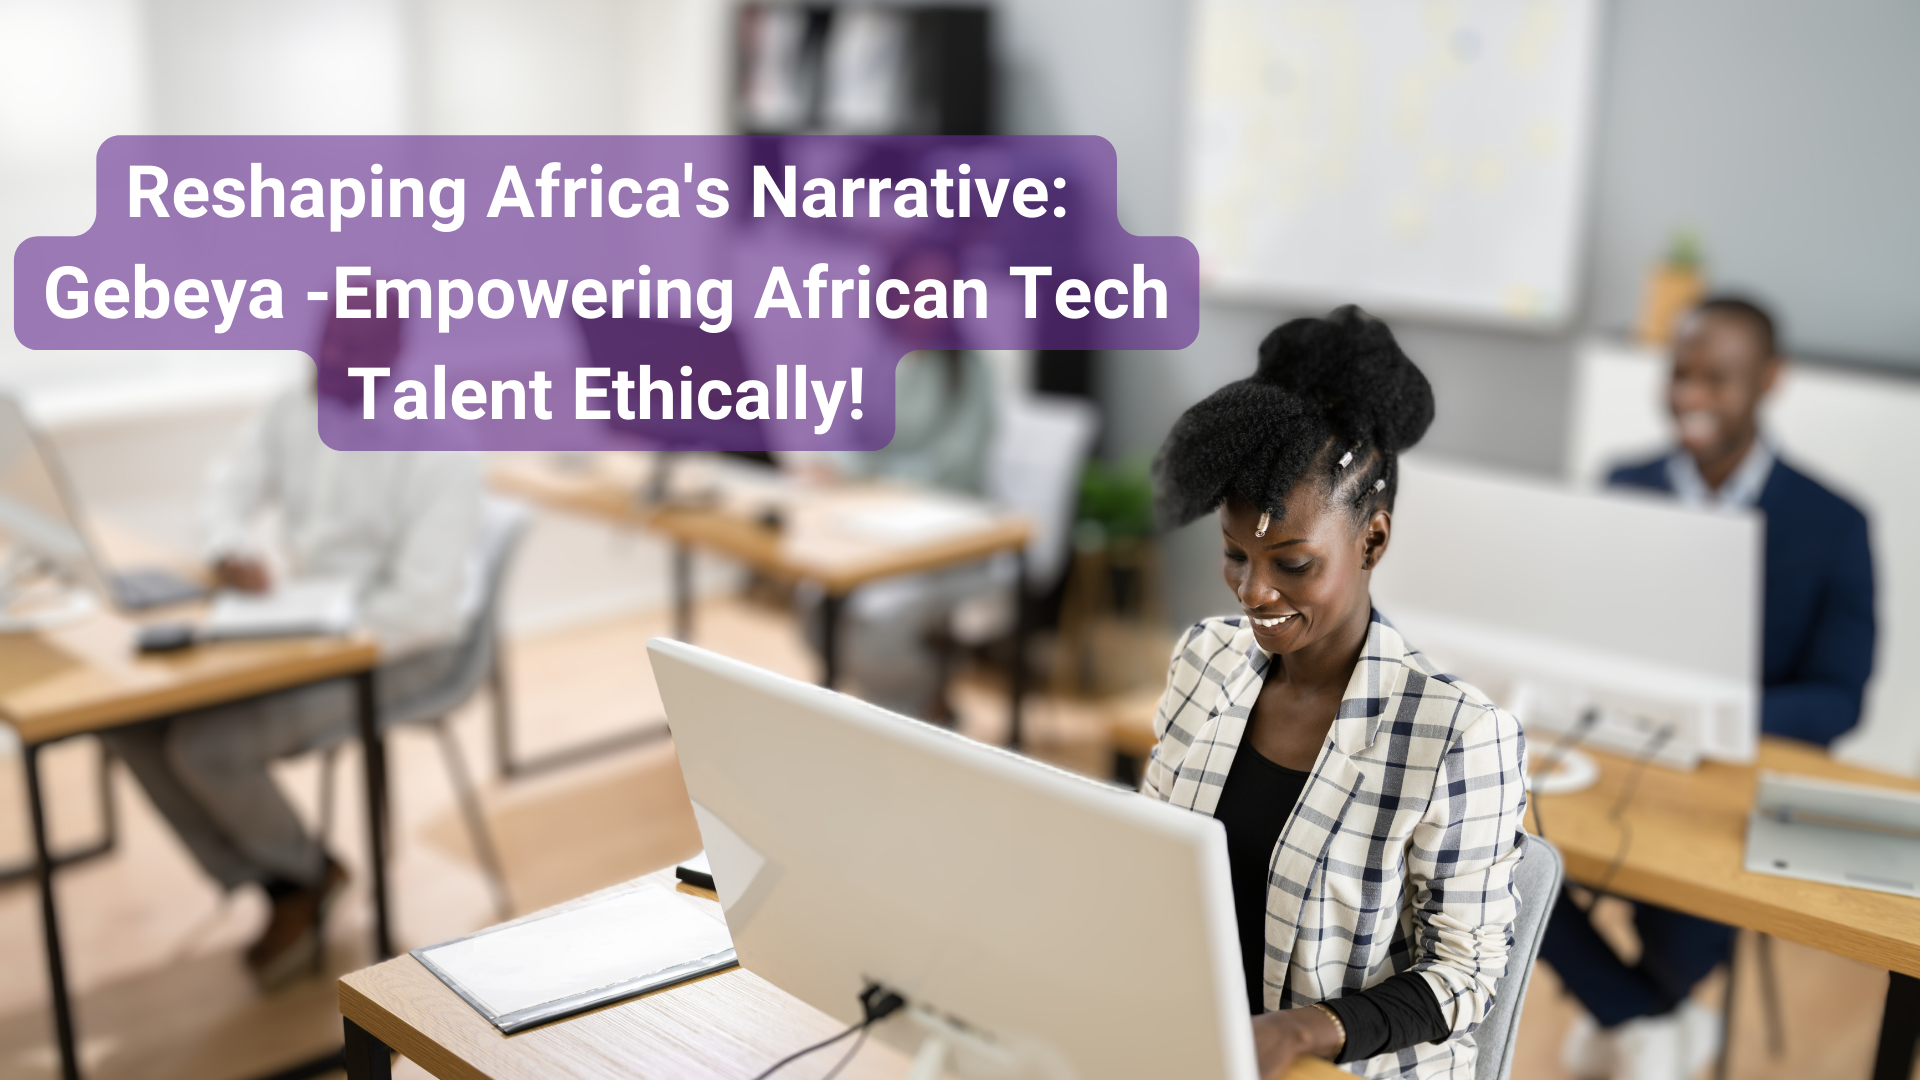 Reshaping-Africas-Narrative-Gebeya-Empowering-African-Tech-Talent-Ethically-3.png